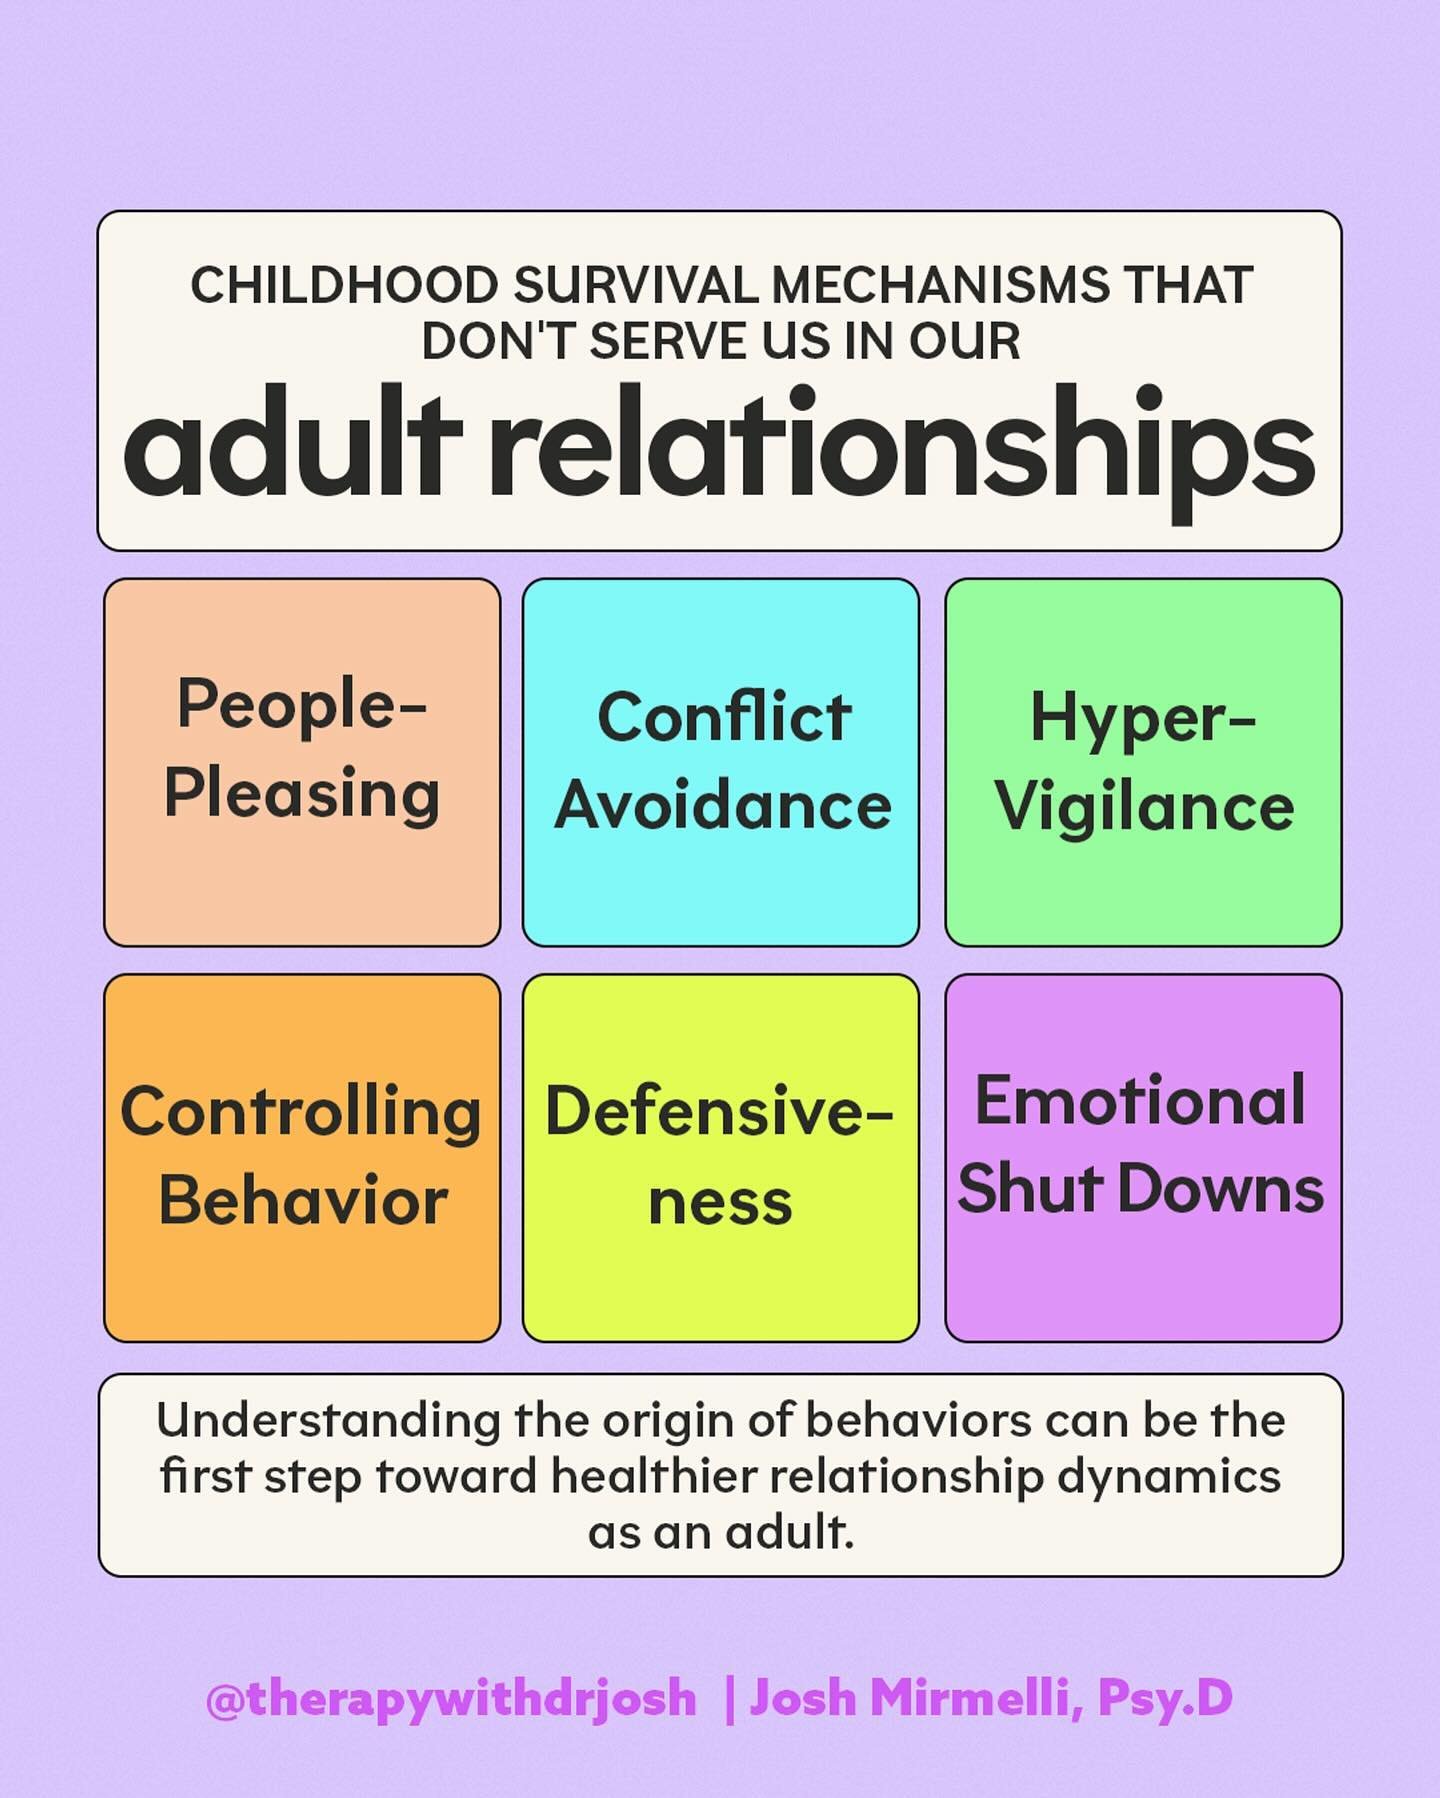 As a therapist, I often explain to my clients that the behaviors we now view as &ldquo;bad&rdquo; actually had their purposes during our childhood. 

These behaviors were your way of navigating complex relationships, or your means to gain love, admir